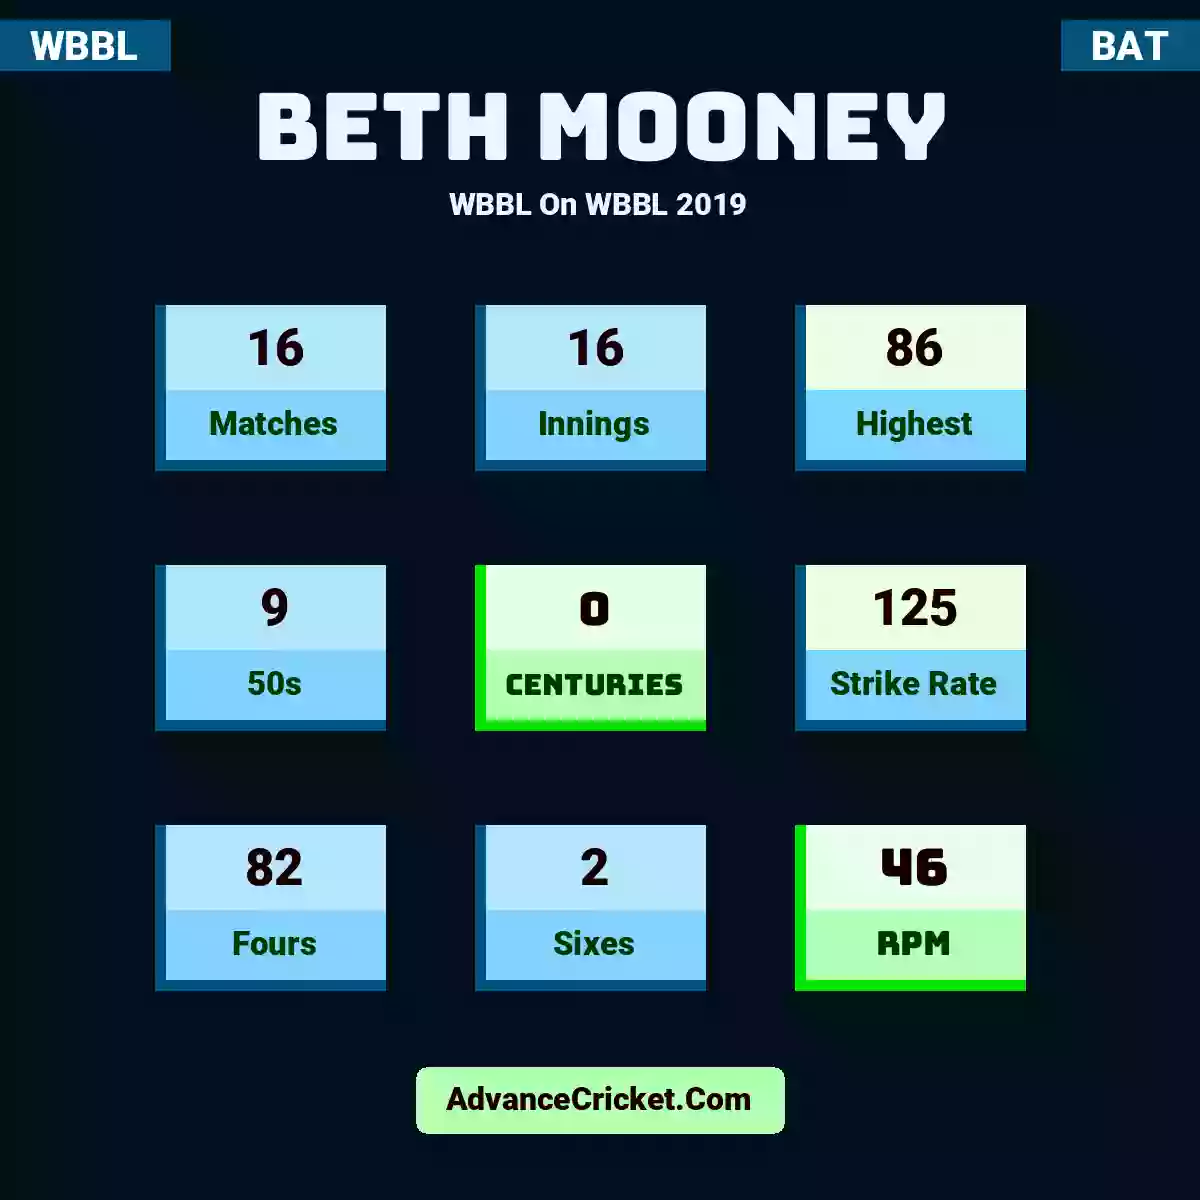 Beth Mooney WBBL  On WBBL 2019, Beth Mooney played 16 matches, scored 86 runs as highest, 9 half-centuries, and 0 centuries, with a strike rate of 125. B.Mooney hit 82 fours and 2 sixes, with an RPM of 46.